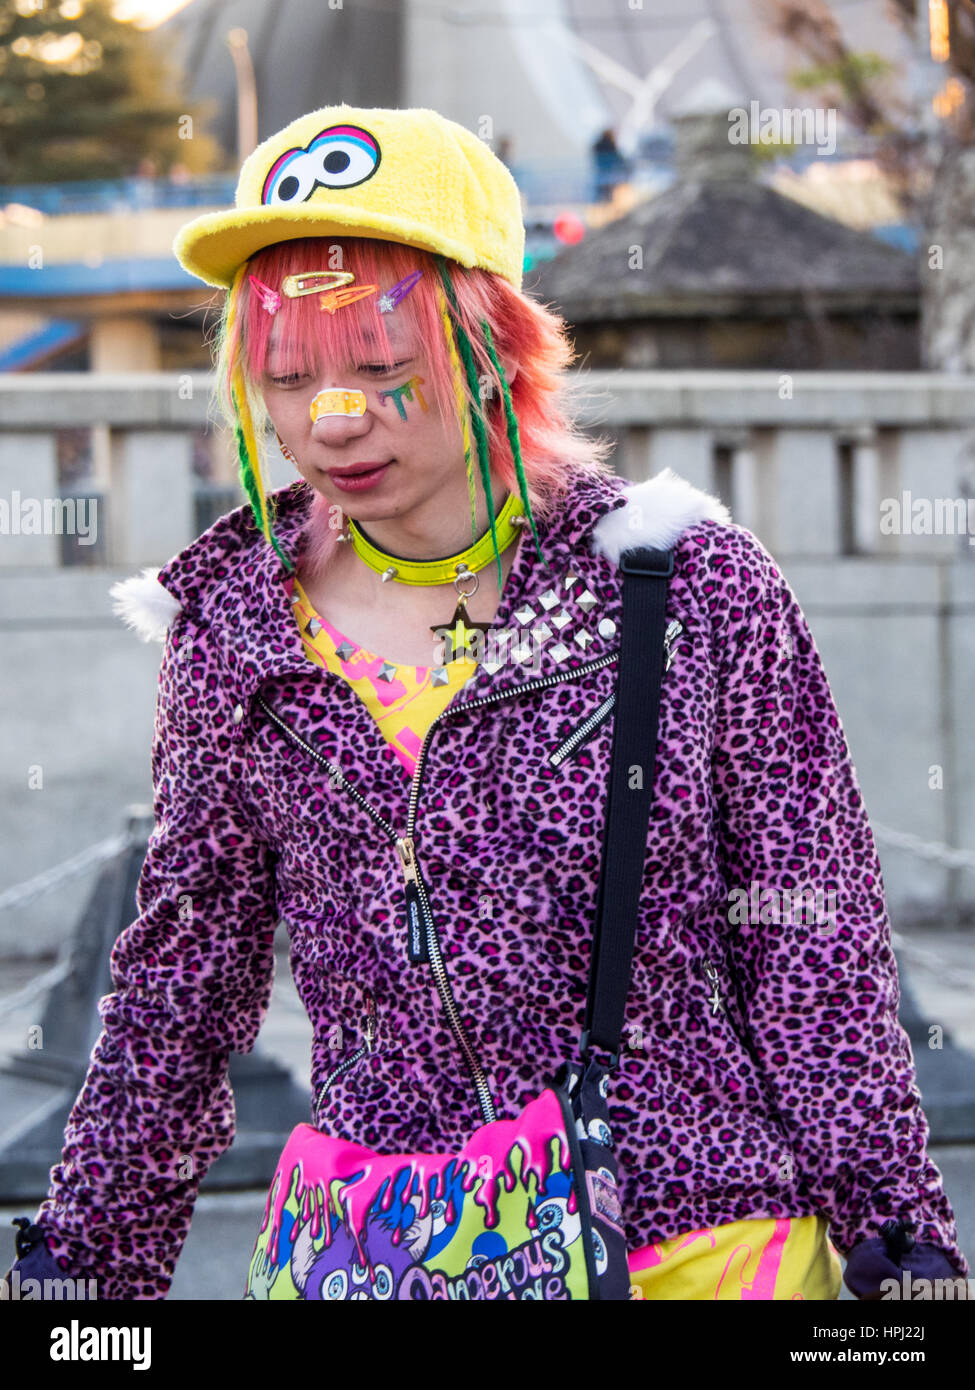 A young Japanese adult male dressed in stylized street fashion in Harajuku, Tokyo. Stock Photo